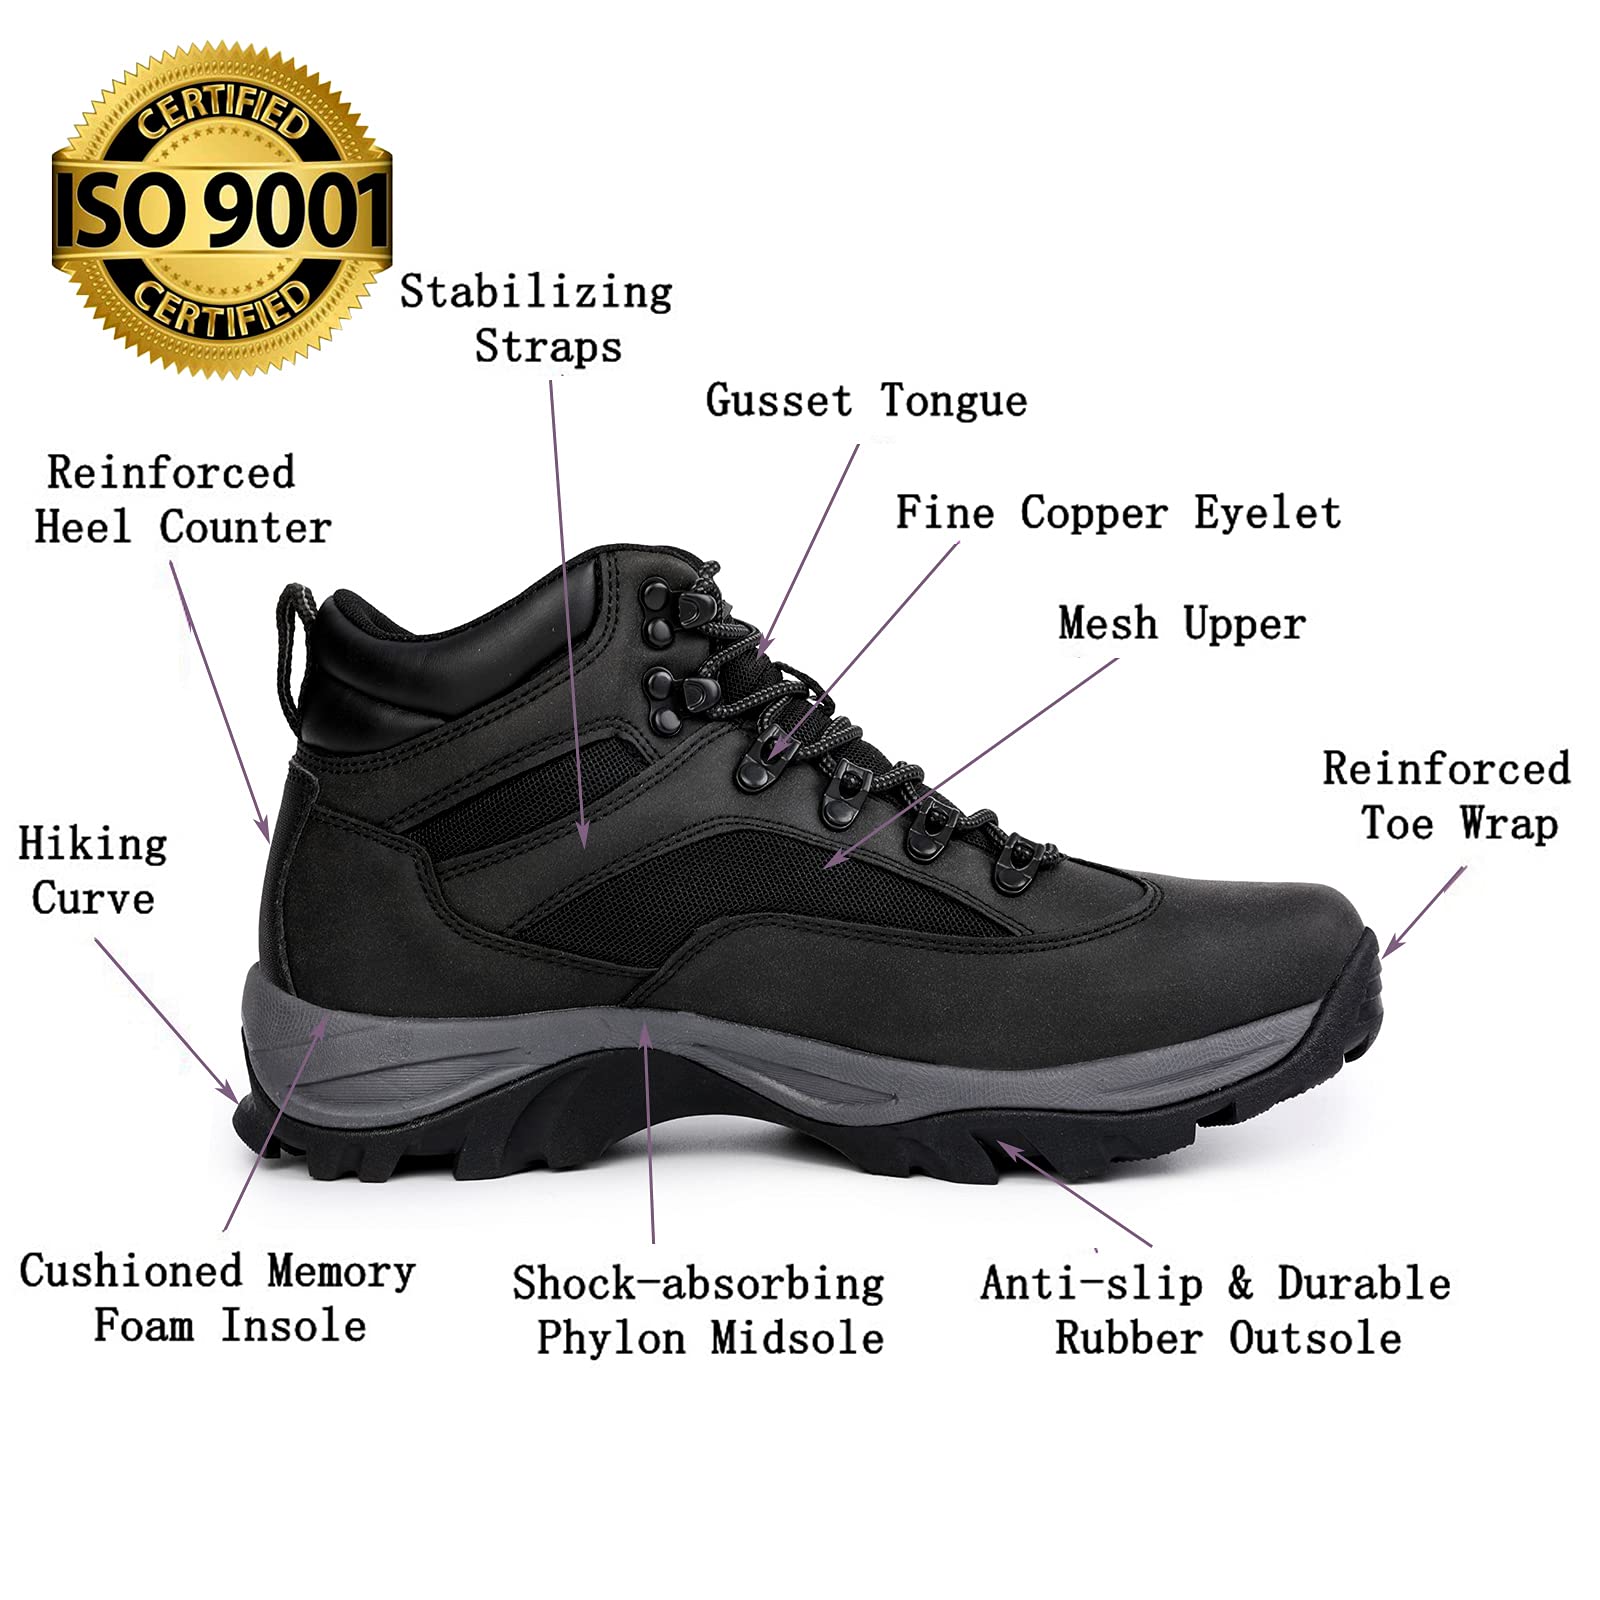 CC-Los Men's Waterproof Hiking Boots Work Boots Outdoor Relaxed Fit Lightweight Size 7-14